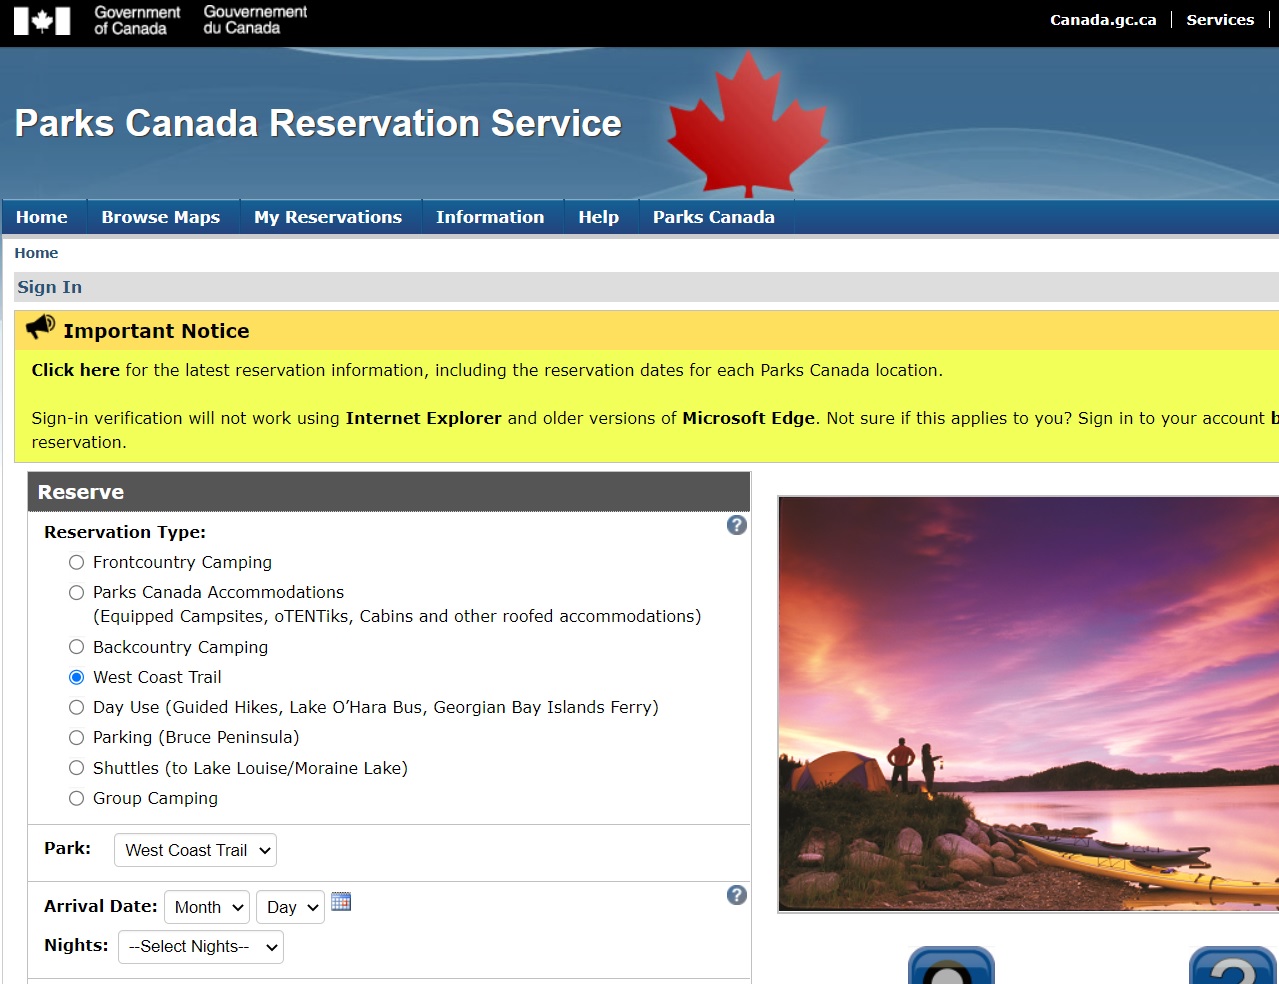 Screenshot of the Parks Canada Reservation Service website